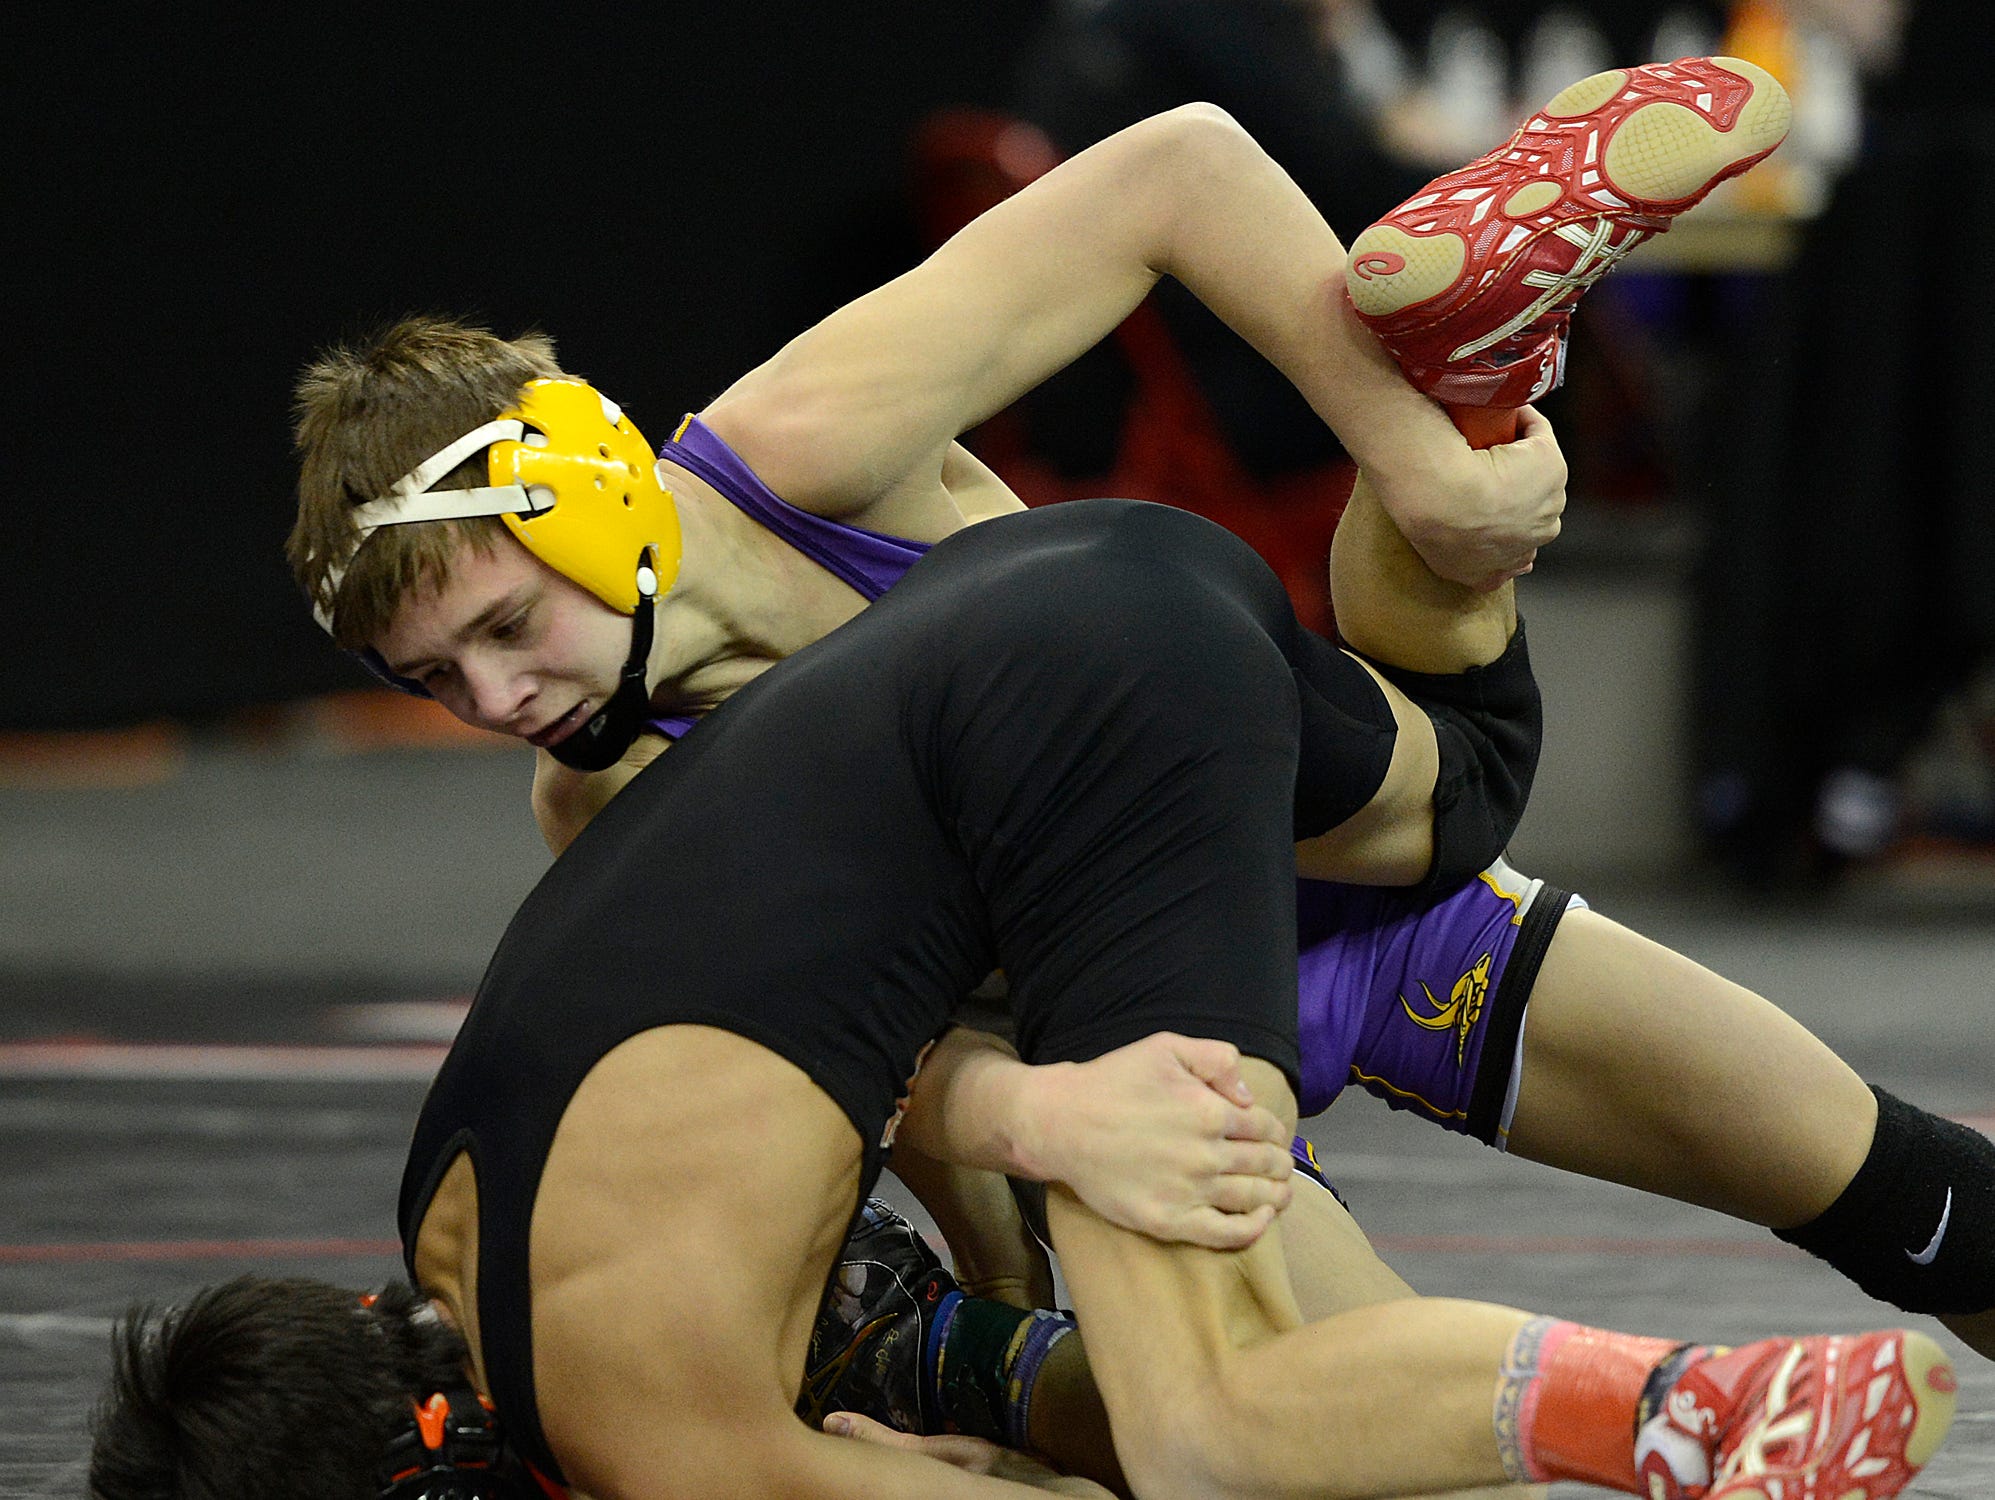 How can you find the WIAA wrestling rankings?